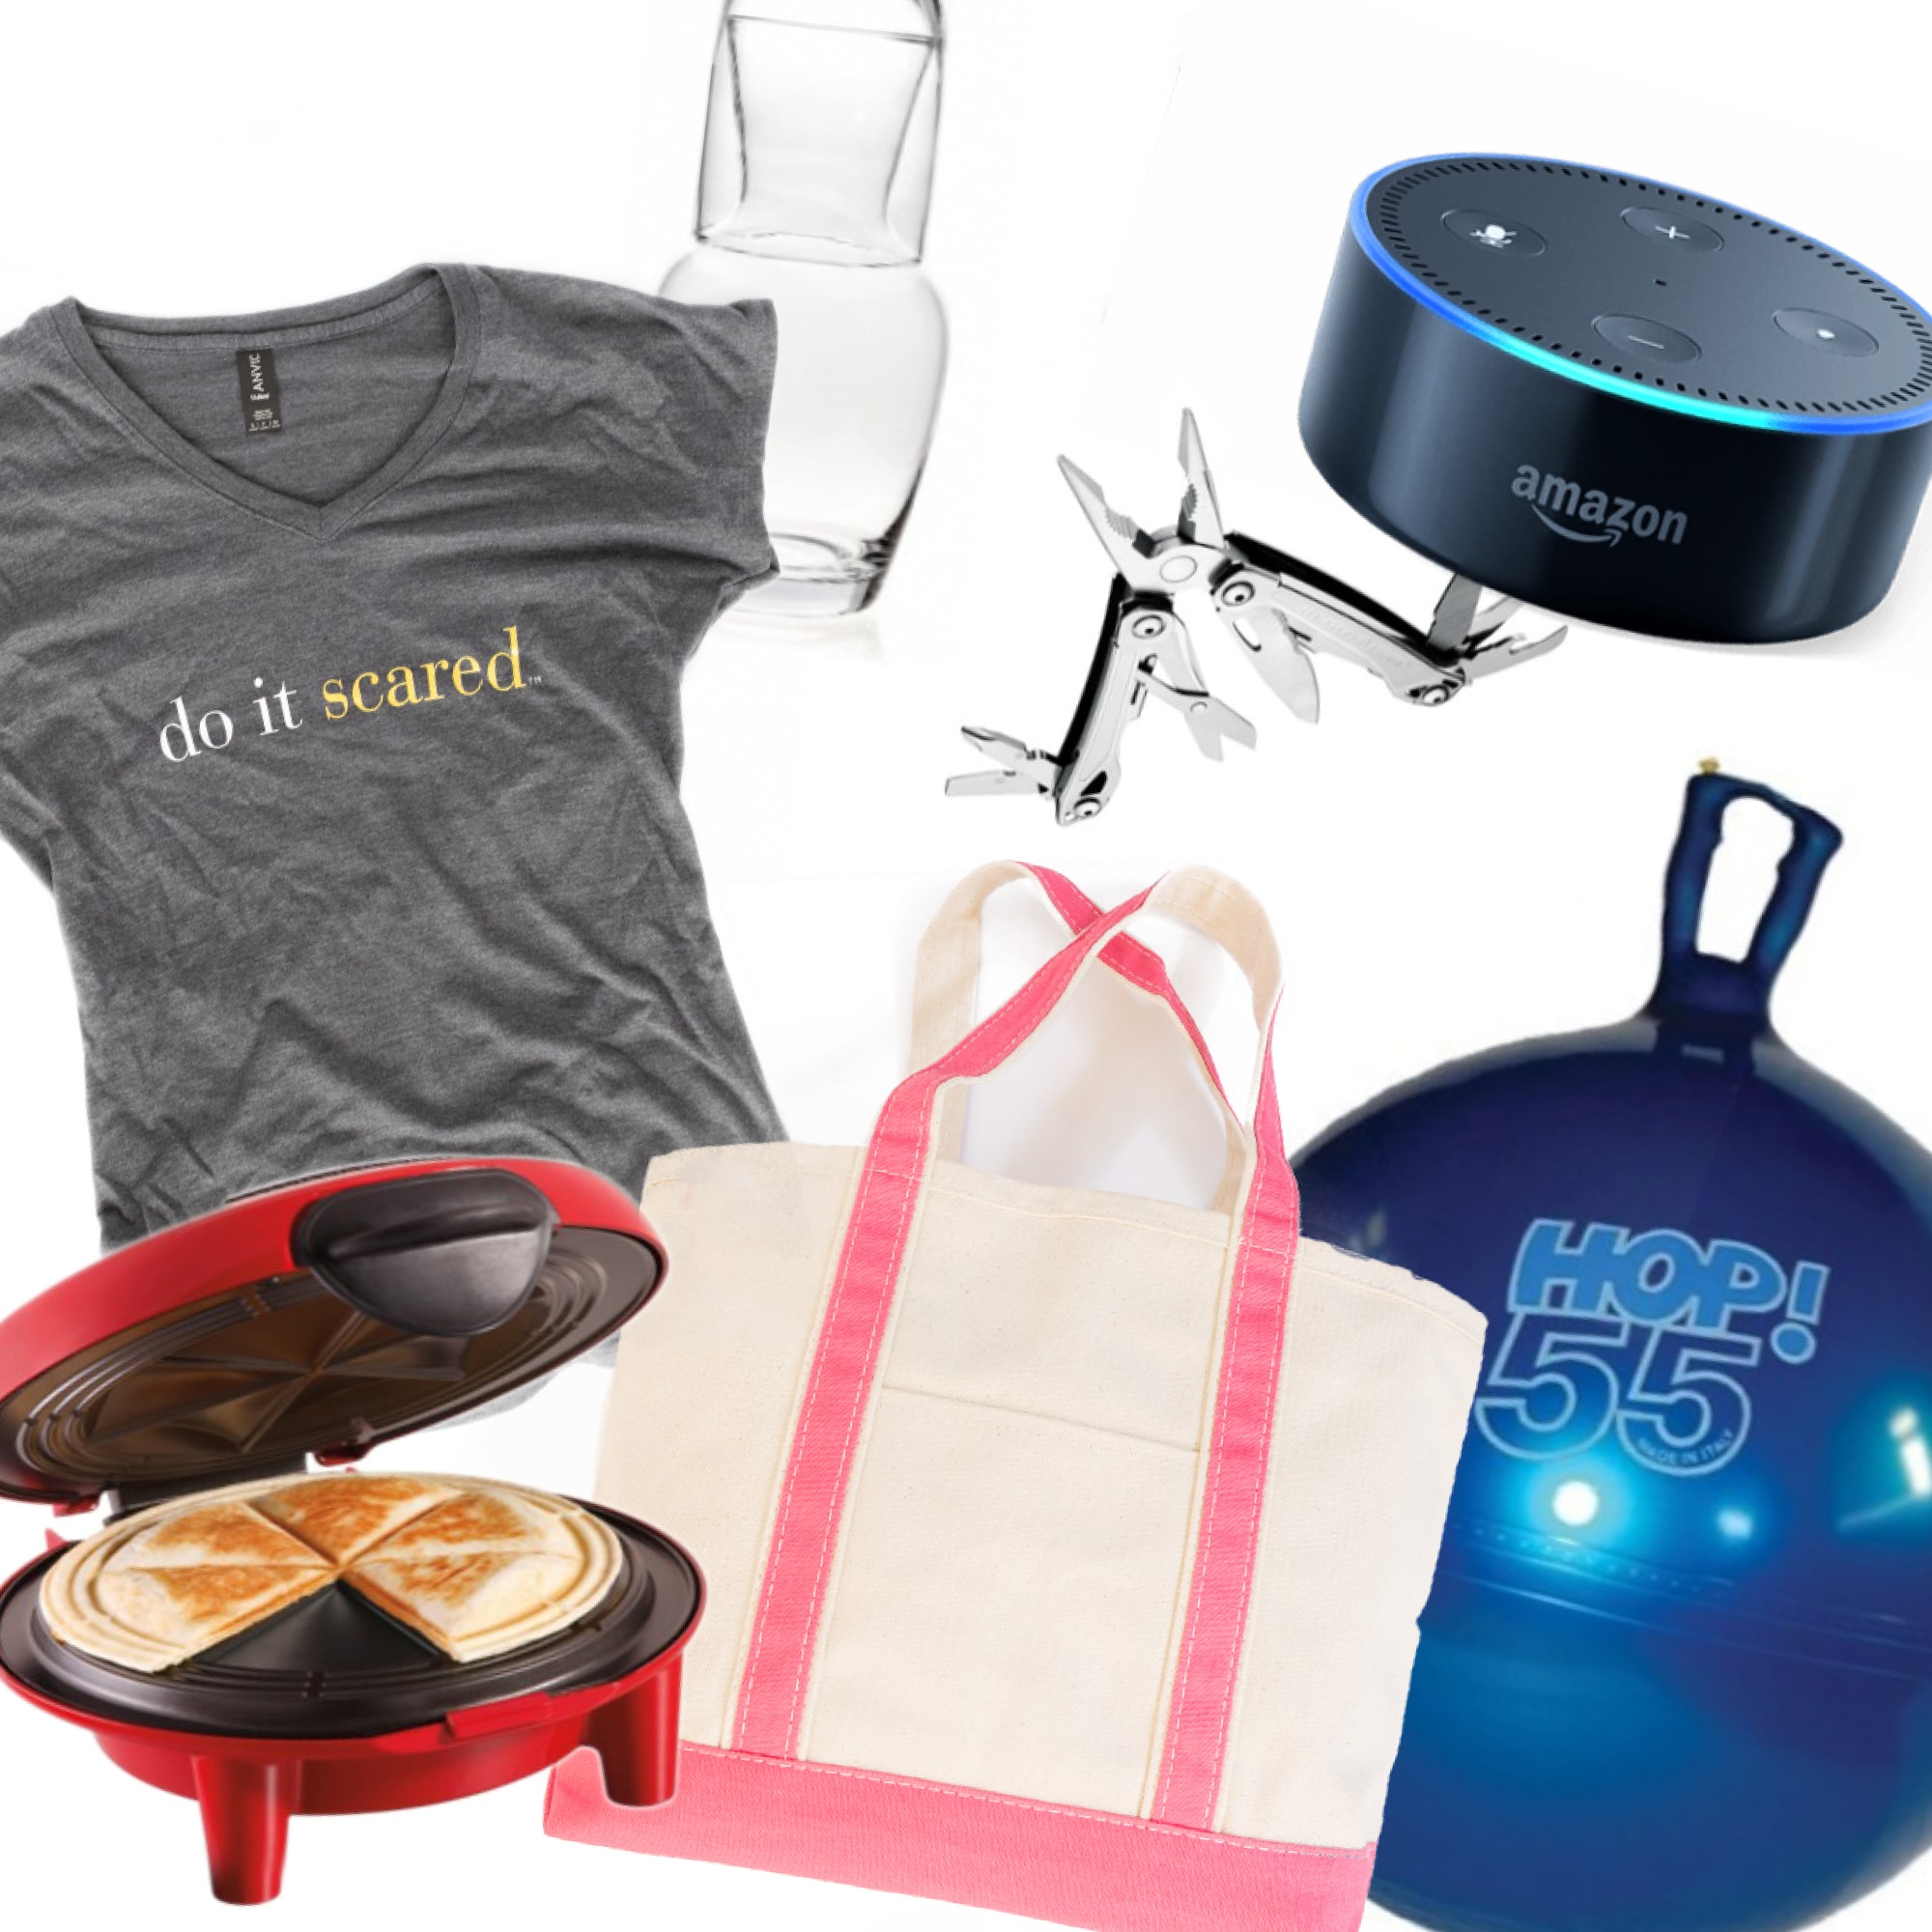 30 Awesome Gifts Under $30  Best Christmas Gifts Under $30